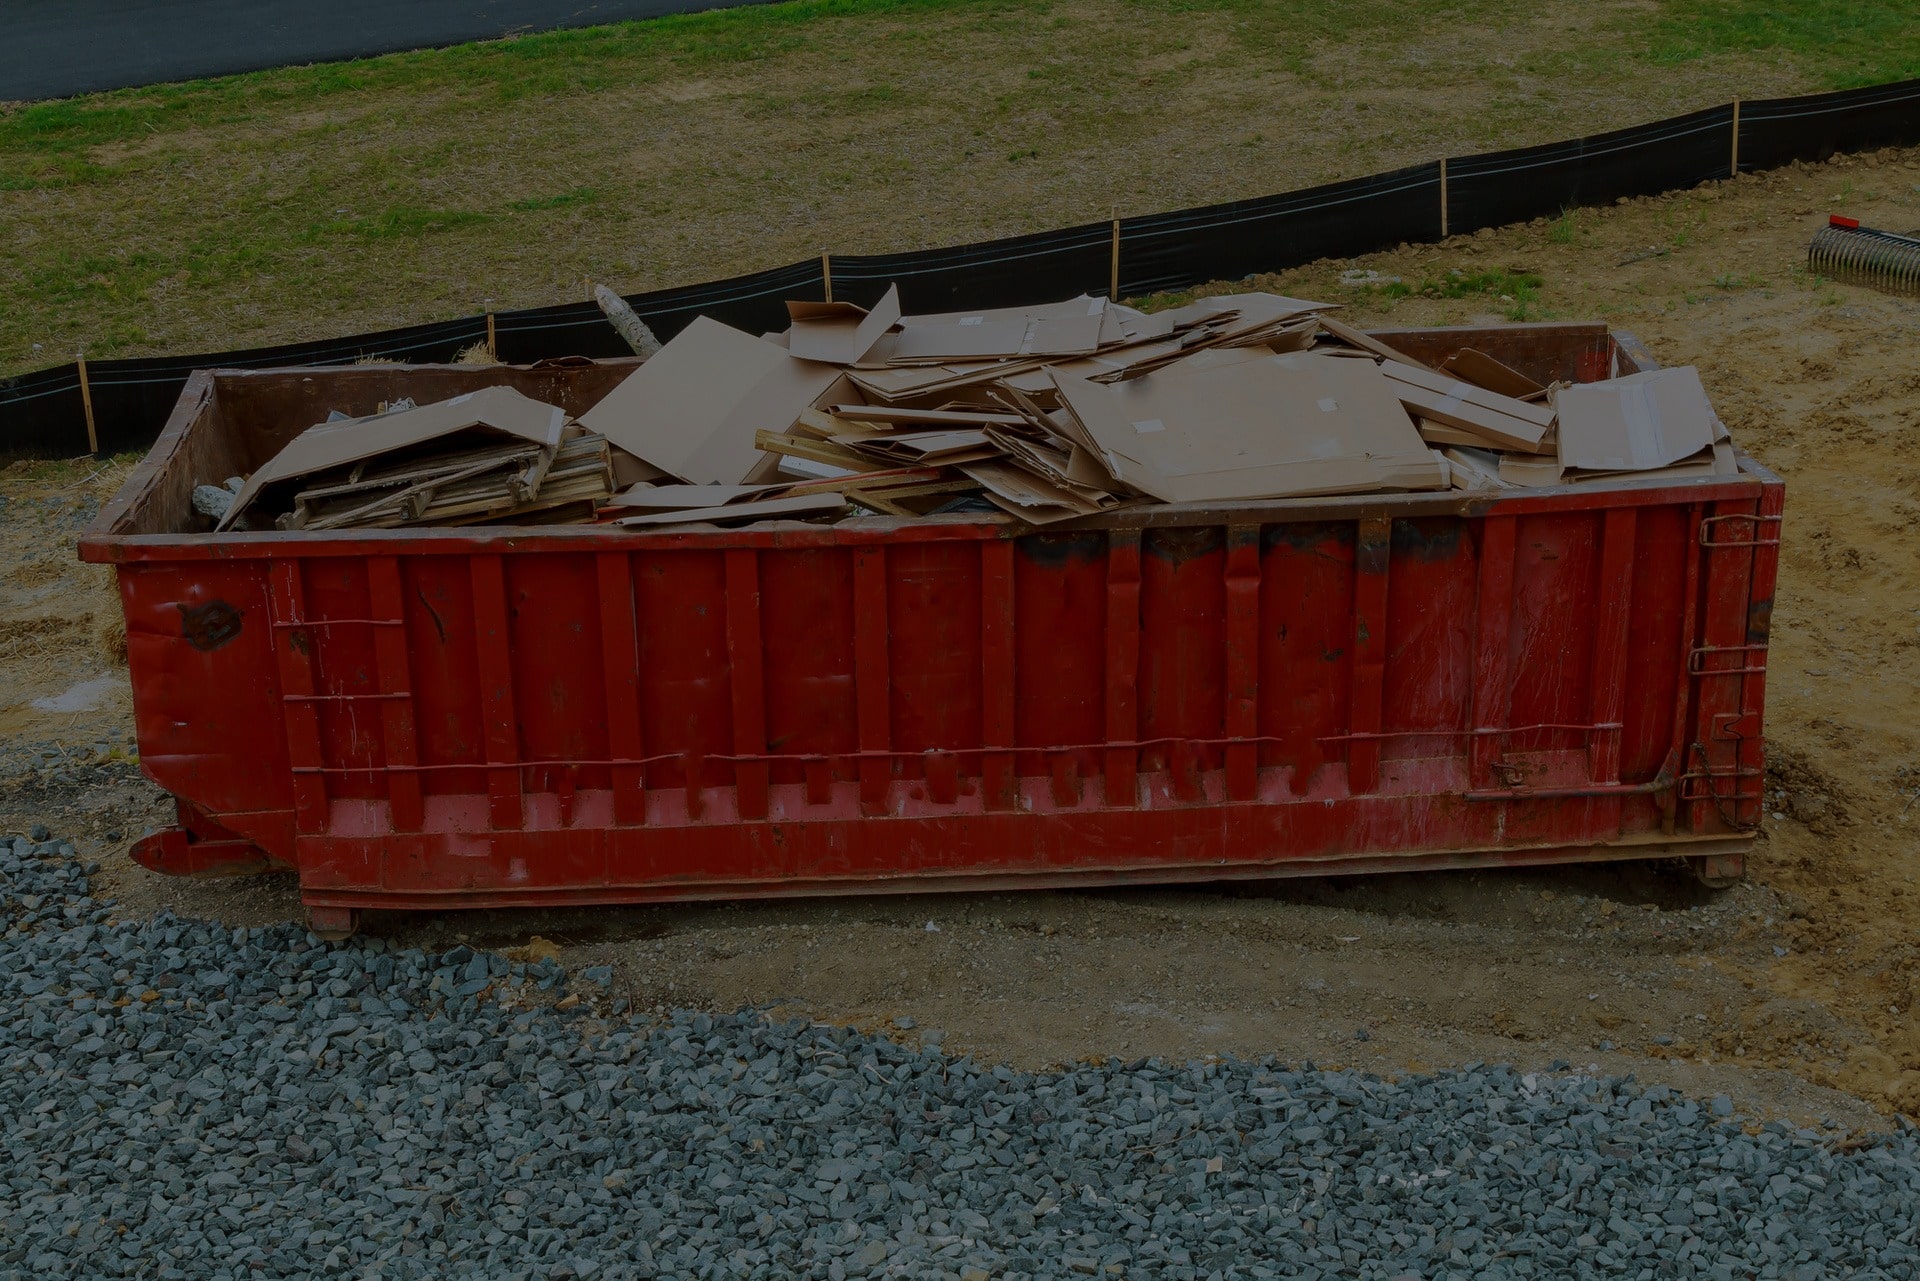 Can You Mix Different Types of Waste in the Same Dumpster?